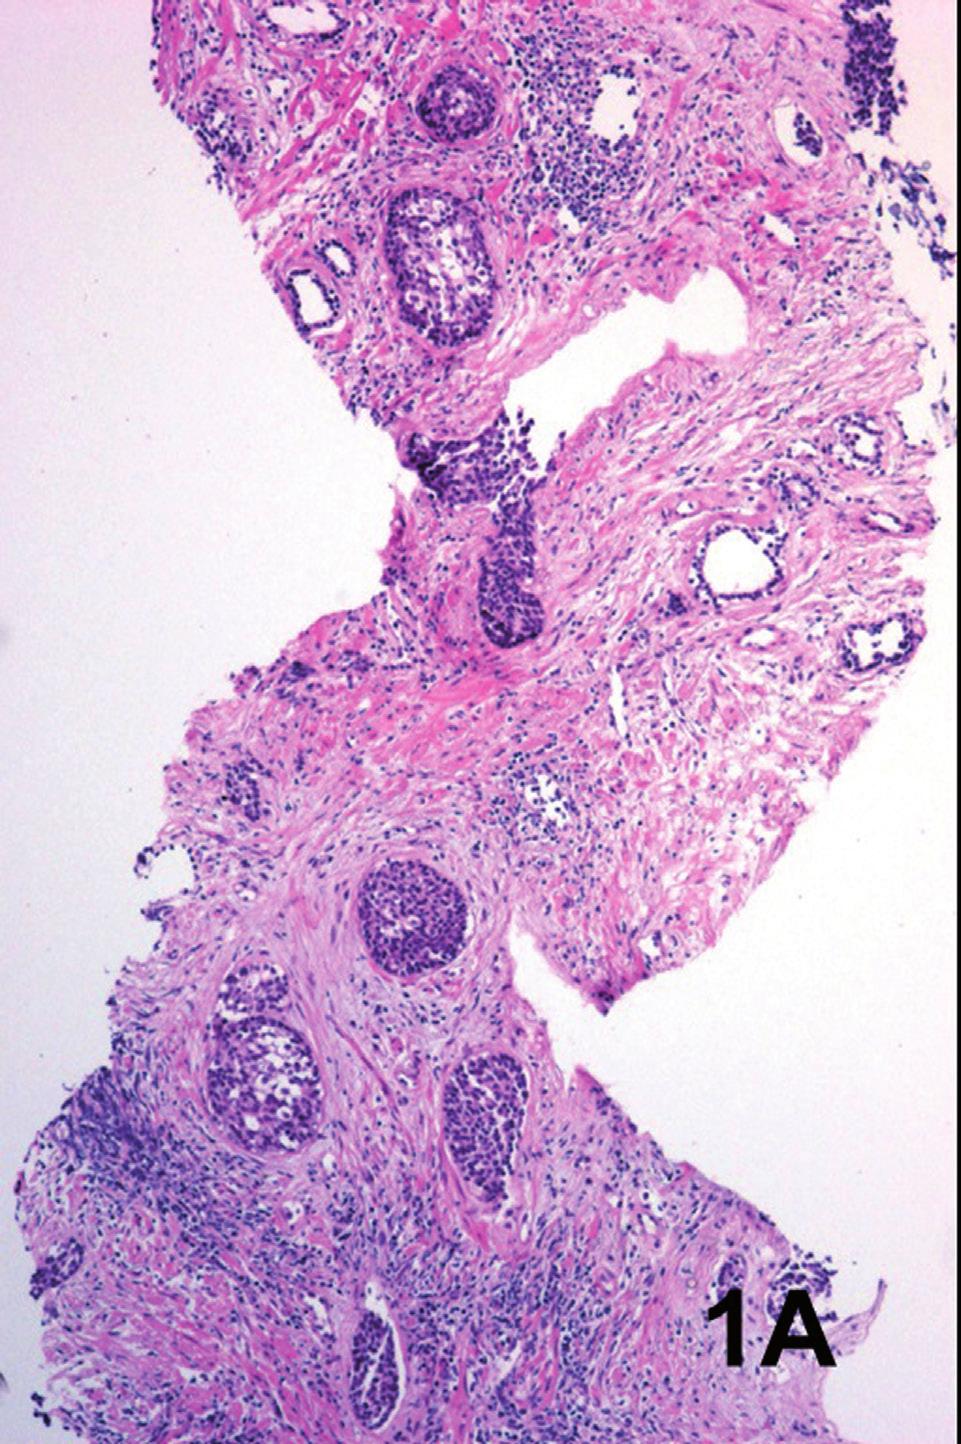 ibju Low grade urothelial carcinoma in prostate biopsy diagnosis in case 1 was low-grade urothelial carcinoma in situ. Case 2 corresponded to an in situ carcinoma with probable stromal infiltration.